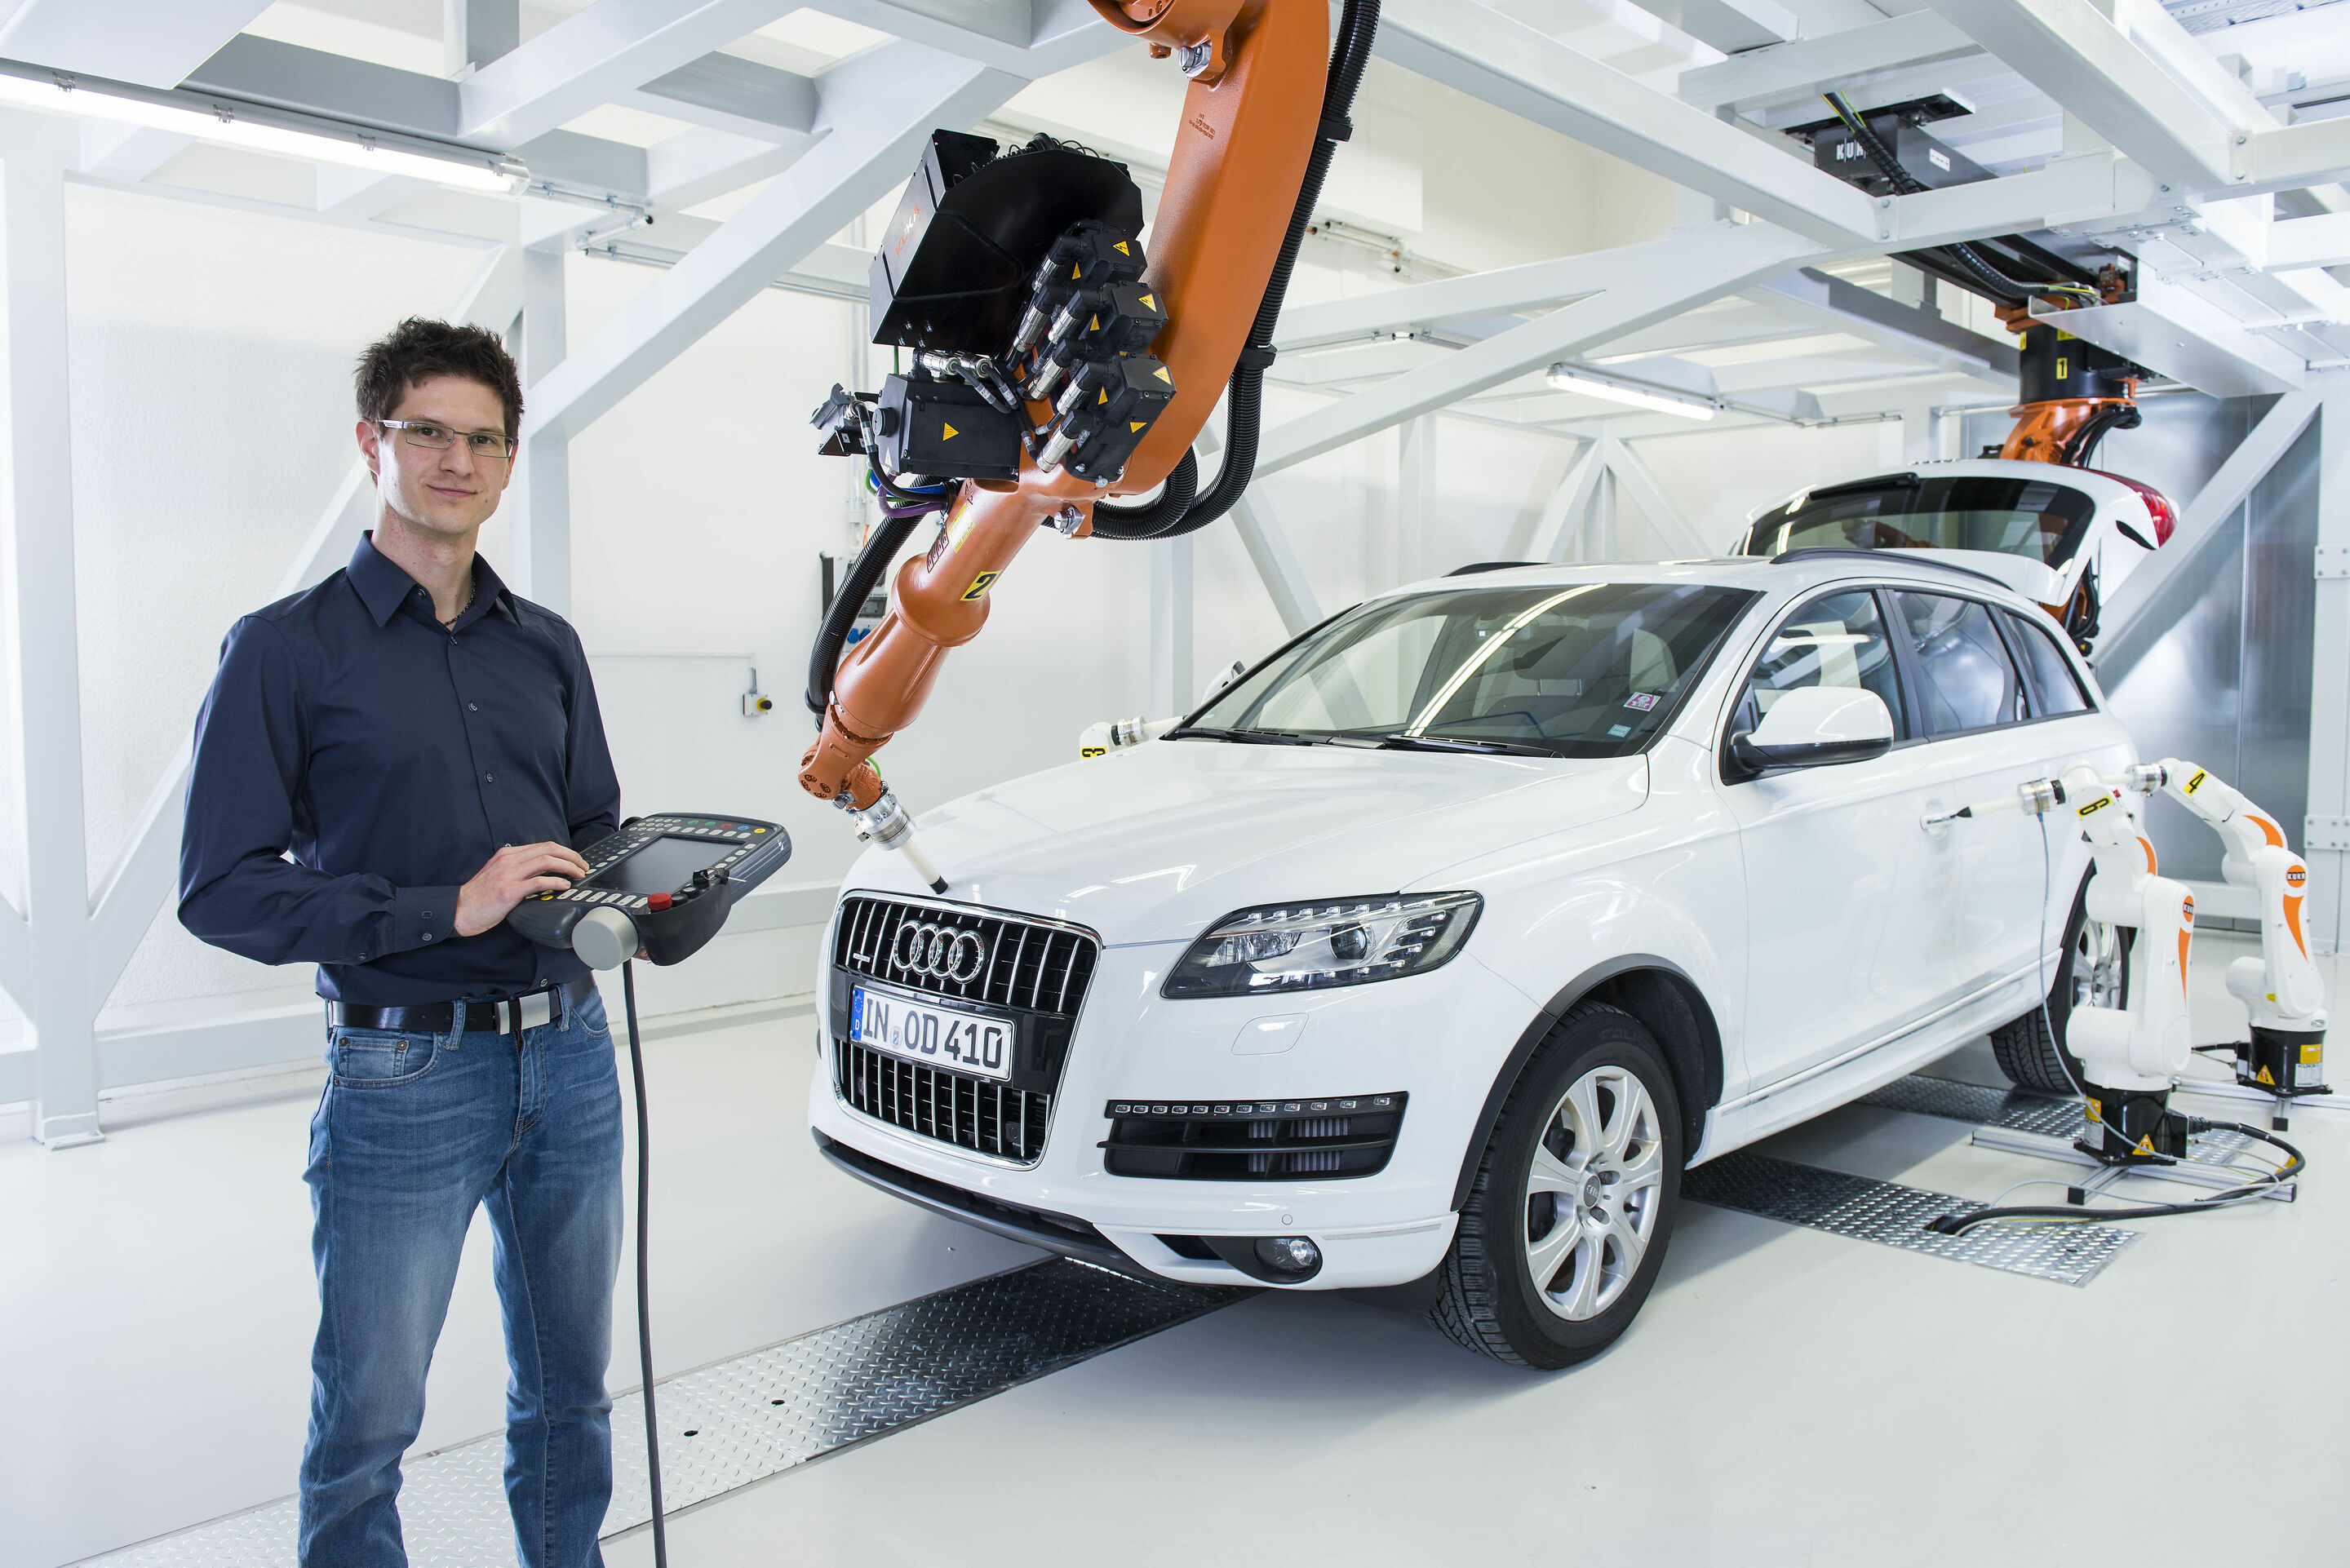 Audi is Europe’s top employer